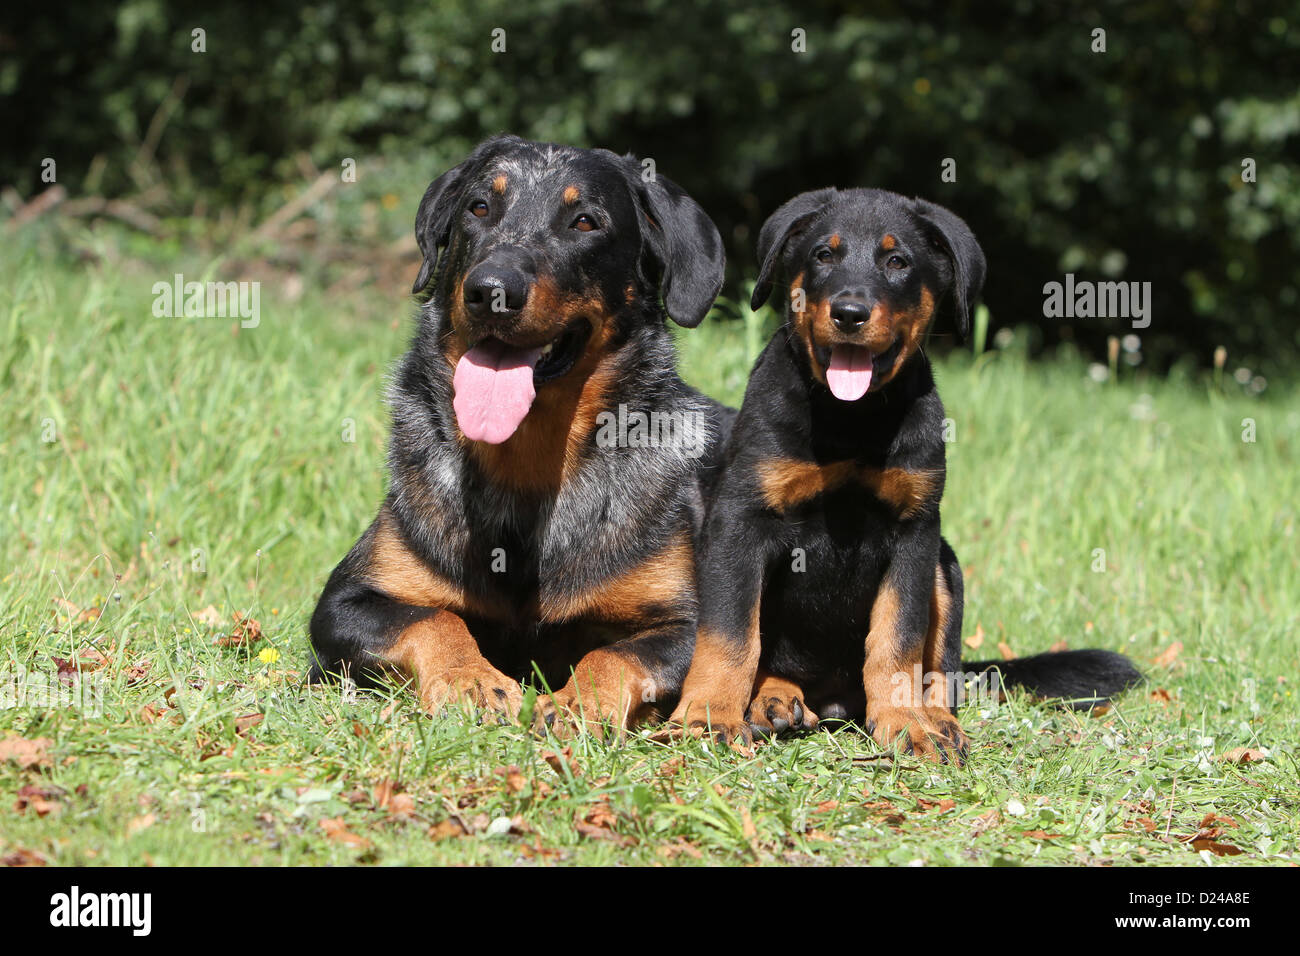 Dog Beauceron / Berger de Beauce  adult and puppy different colors (Harlequin, black and tan) lying in a meadow Stock Photo